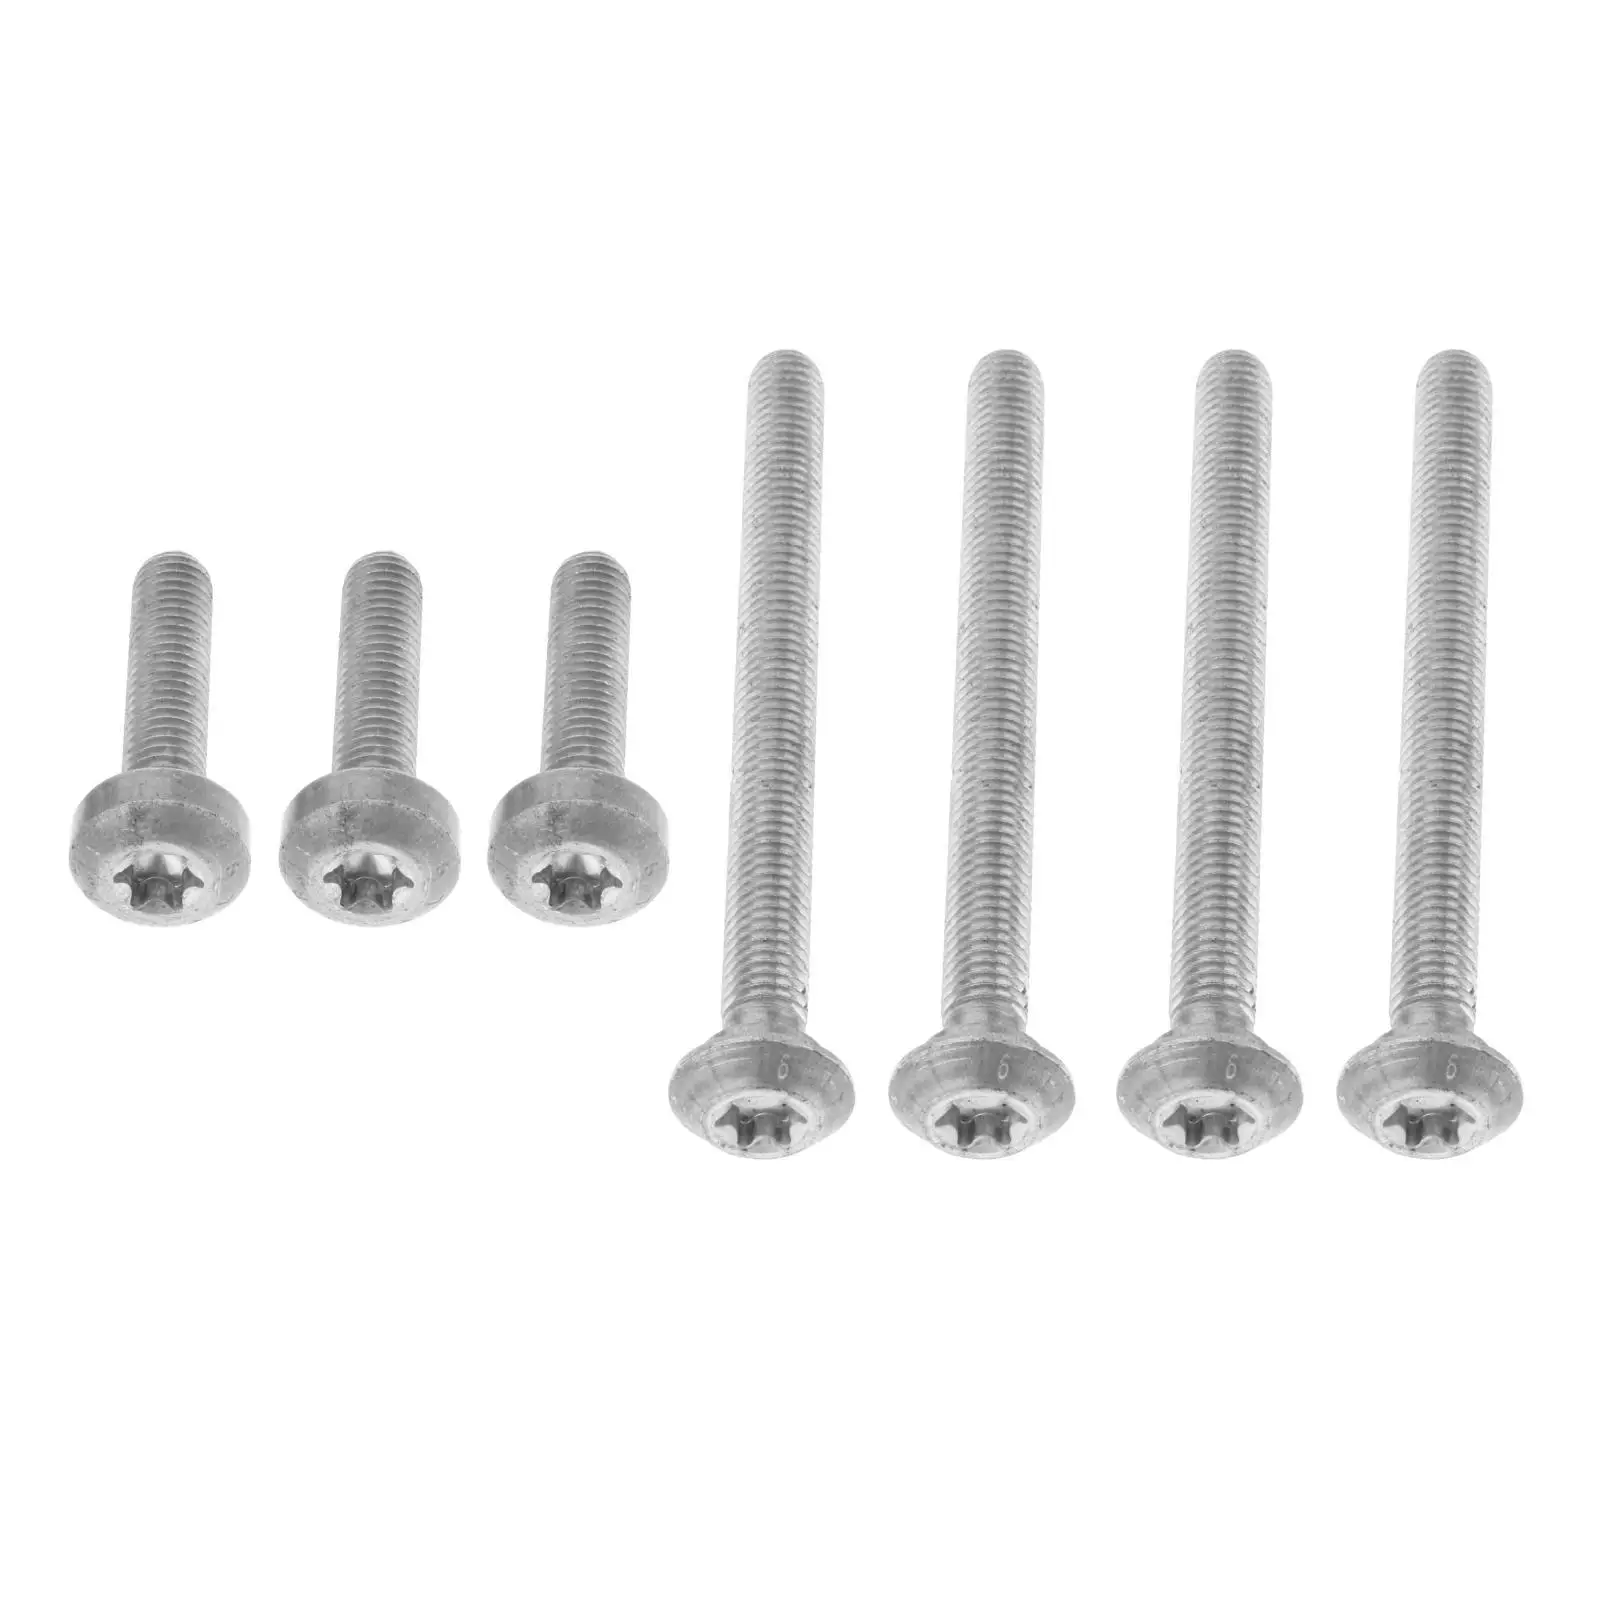 7 Pieces Dq200 Valve Body Screws 4 Long 3 Short for VW Sagitar Accessories Replacement